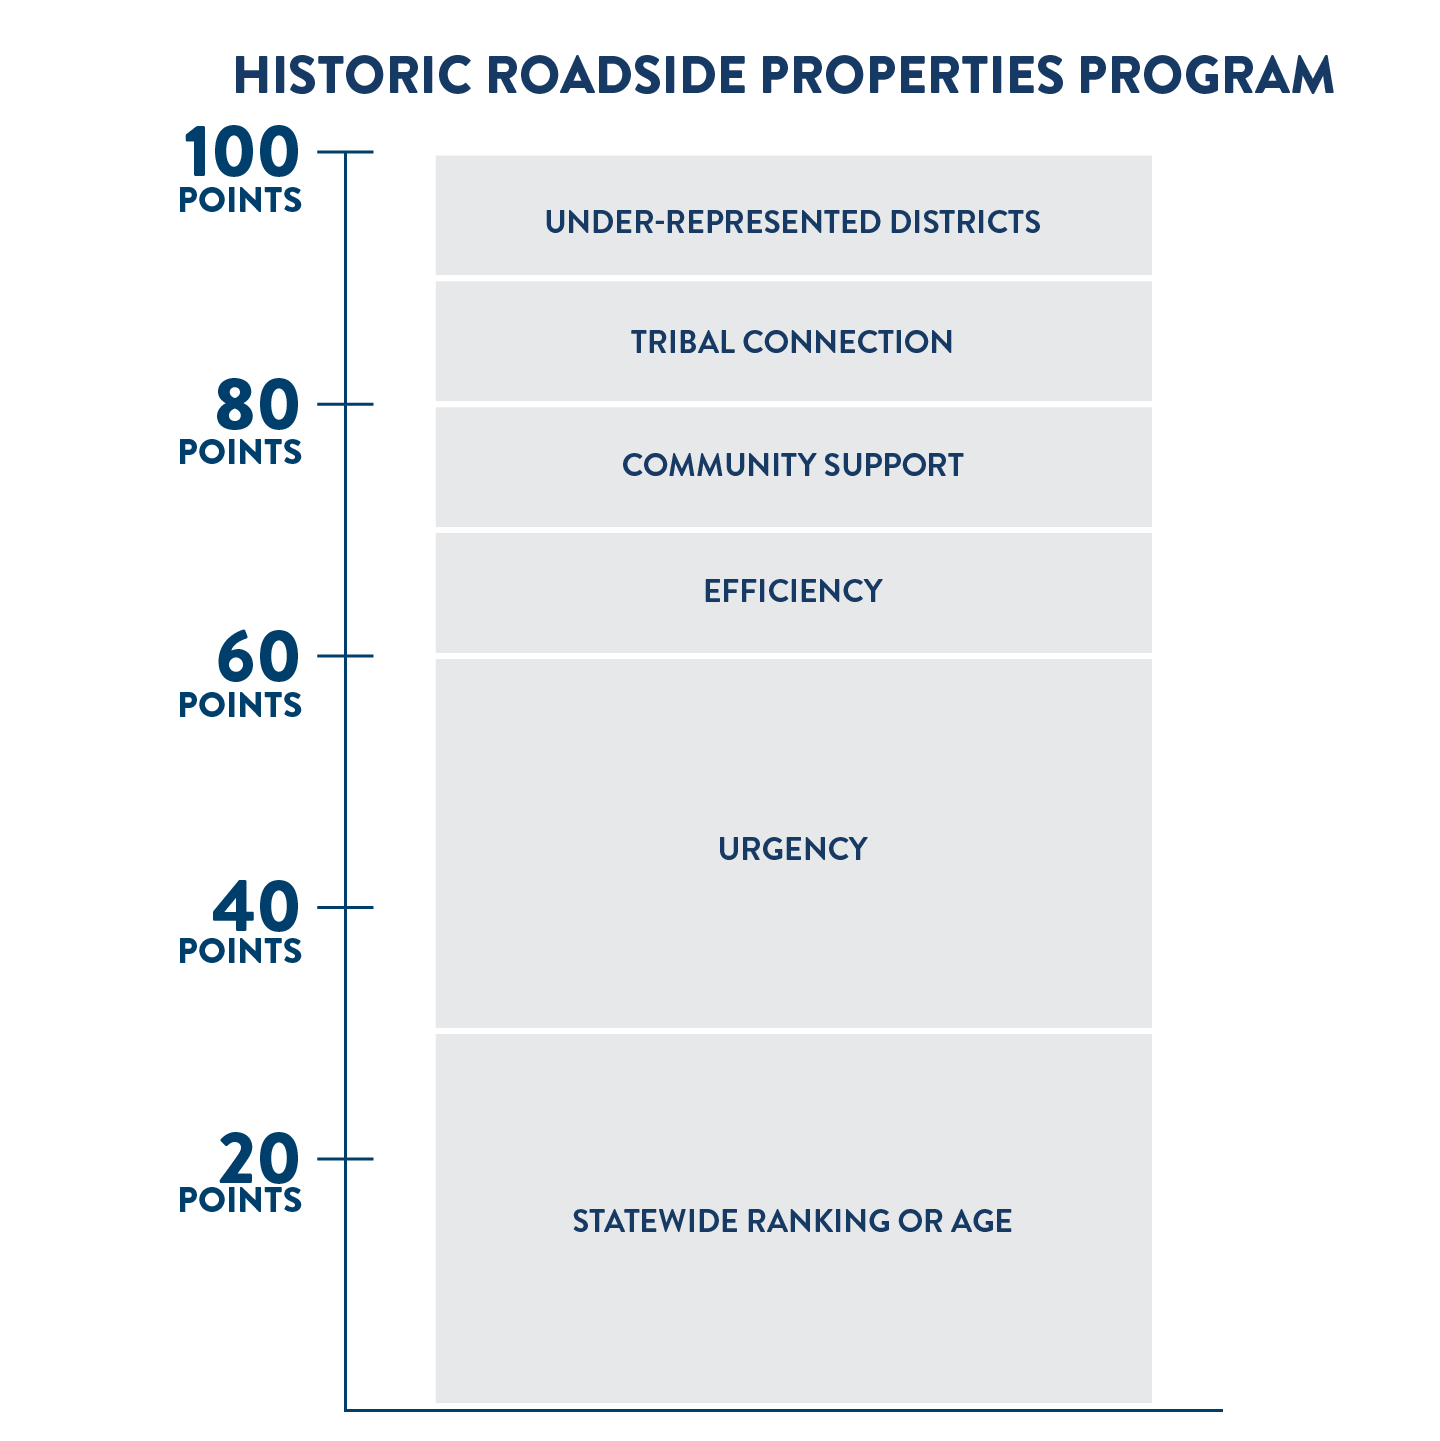 Scoring criteria for historic roadside property projects. Out of 100 possible points, 30 points are based on statewide ranking or age based on the design and historical significance or years since last renovation, 10 points are based on whether urgent repairs are needed due to a crash, weather or rapid deterioration, 10 points are based on efficiency that might be gained from two or three projects in a similar geography, 10 points are based on local community support or funding contribution, 10 points are based on a tribal connection for properties within reservation boundaries, and 10 points are based on whether a project is located in MnDOT districts 2,7 or 8 which have fewer than average number of historic properties.
